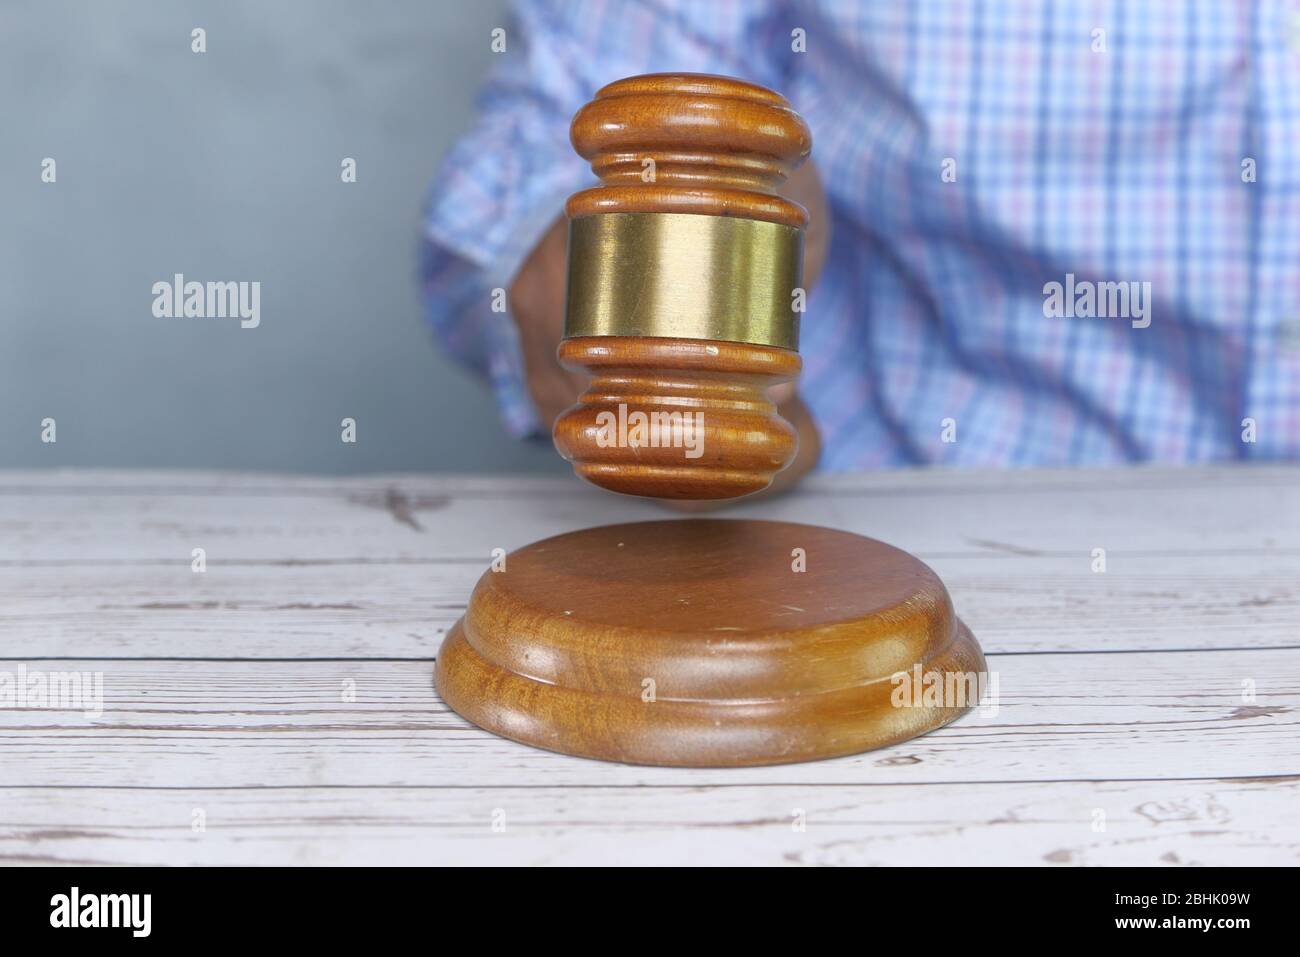 Judge Hand Banging the Gavel on Court Room Table. Stock Photo